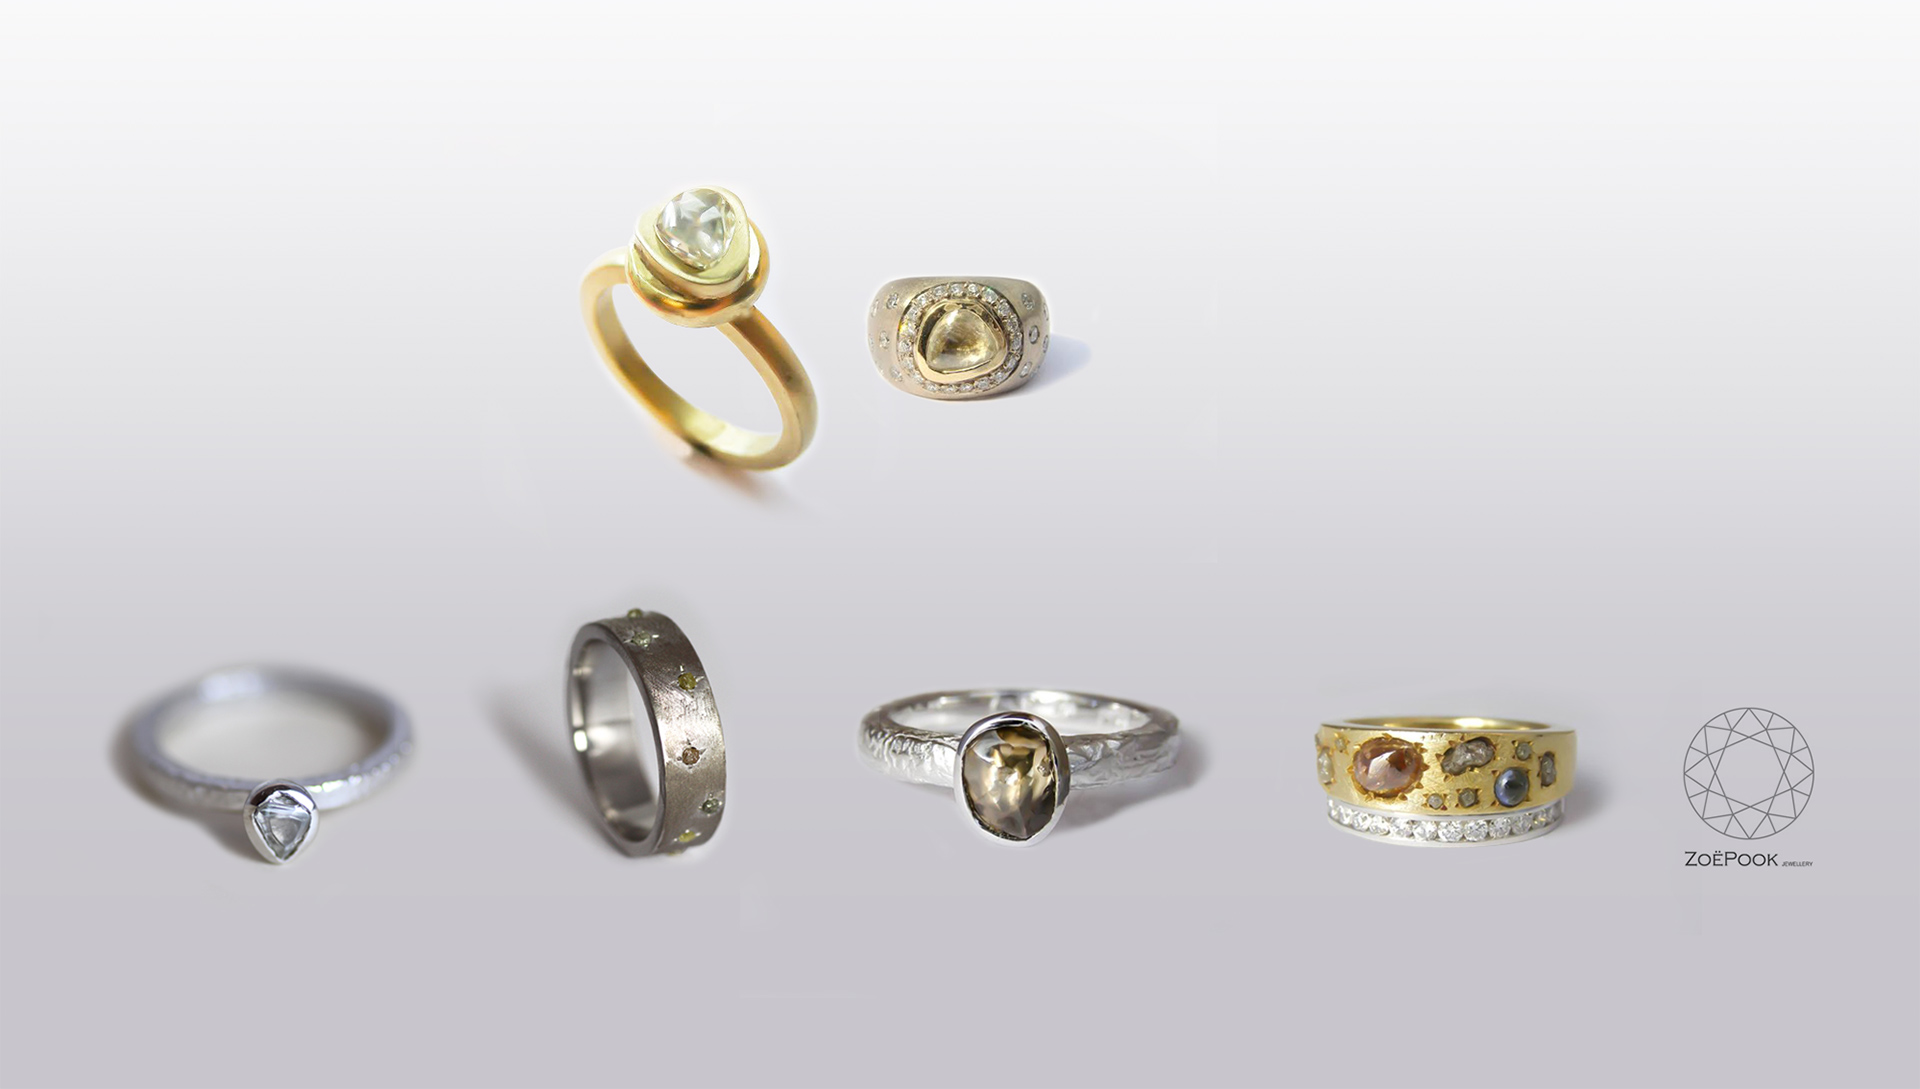 These designs draw on the rough’s natural crystal character, creating totally individual modern pieces of jewellery